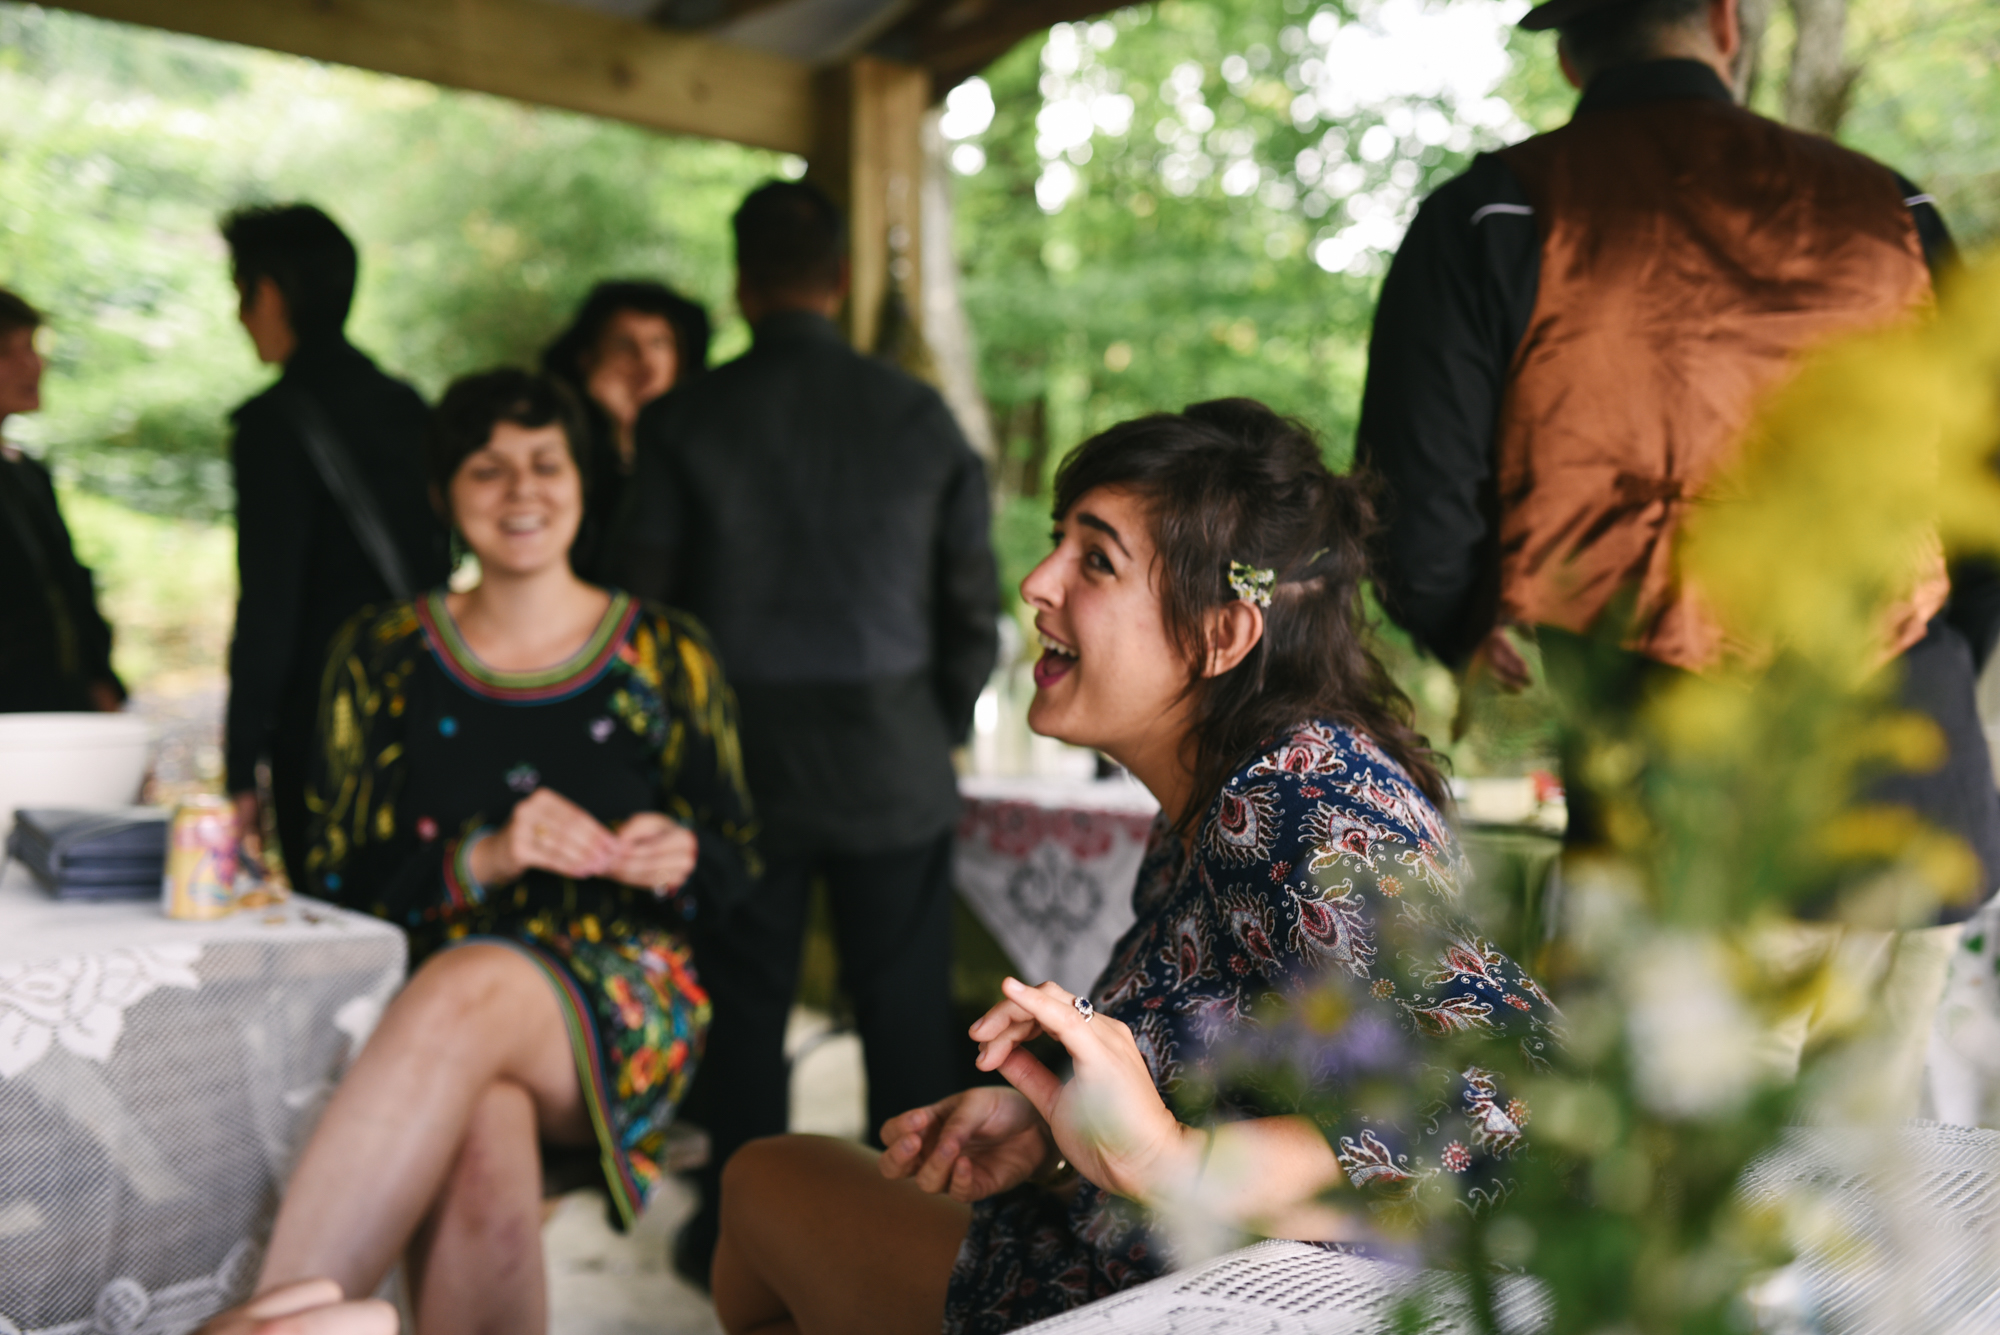  Mountain Wedding, Outdoors, Rustic, West Virginia, Maryland Wedding Photographer, DIY, Casual, Guests laughing and chatting outdoors 